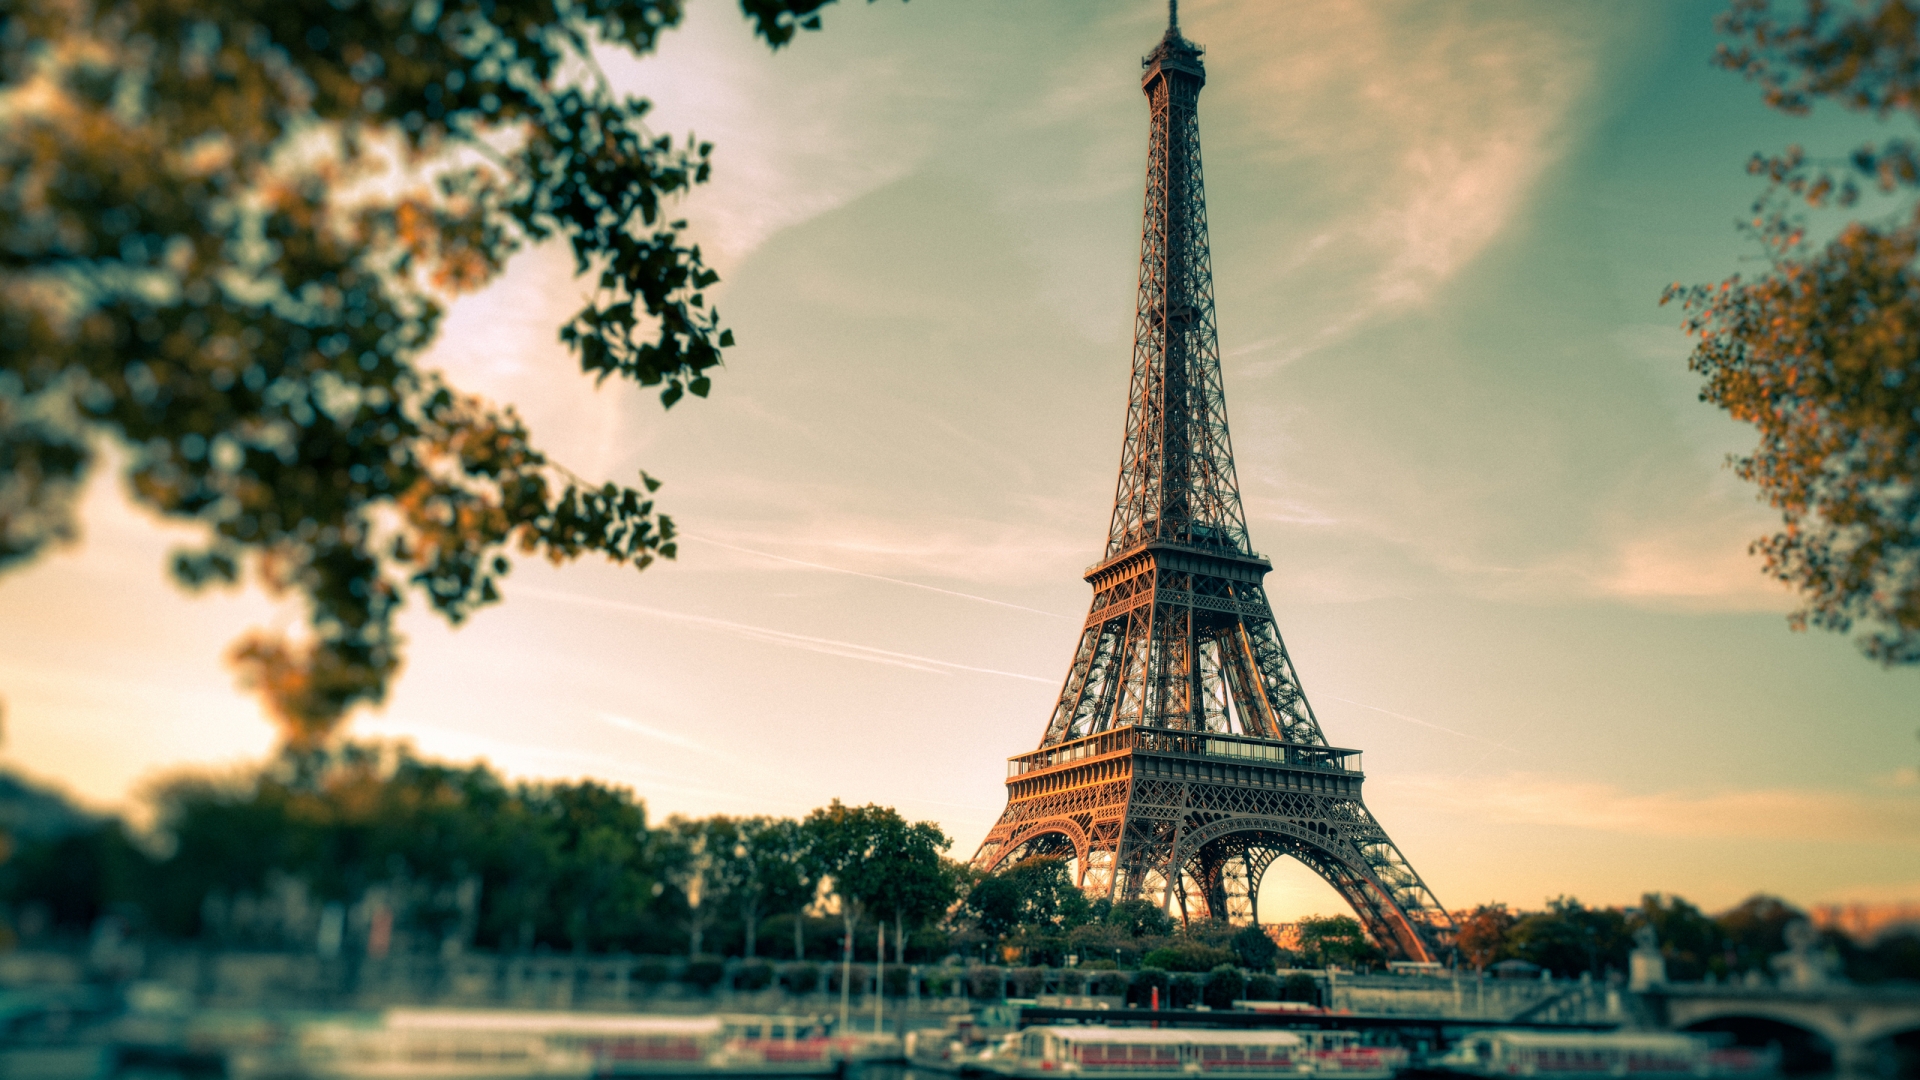 Lovely Eiffel Tower View for 1920 x 1080 HDTV 1080p resolution